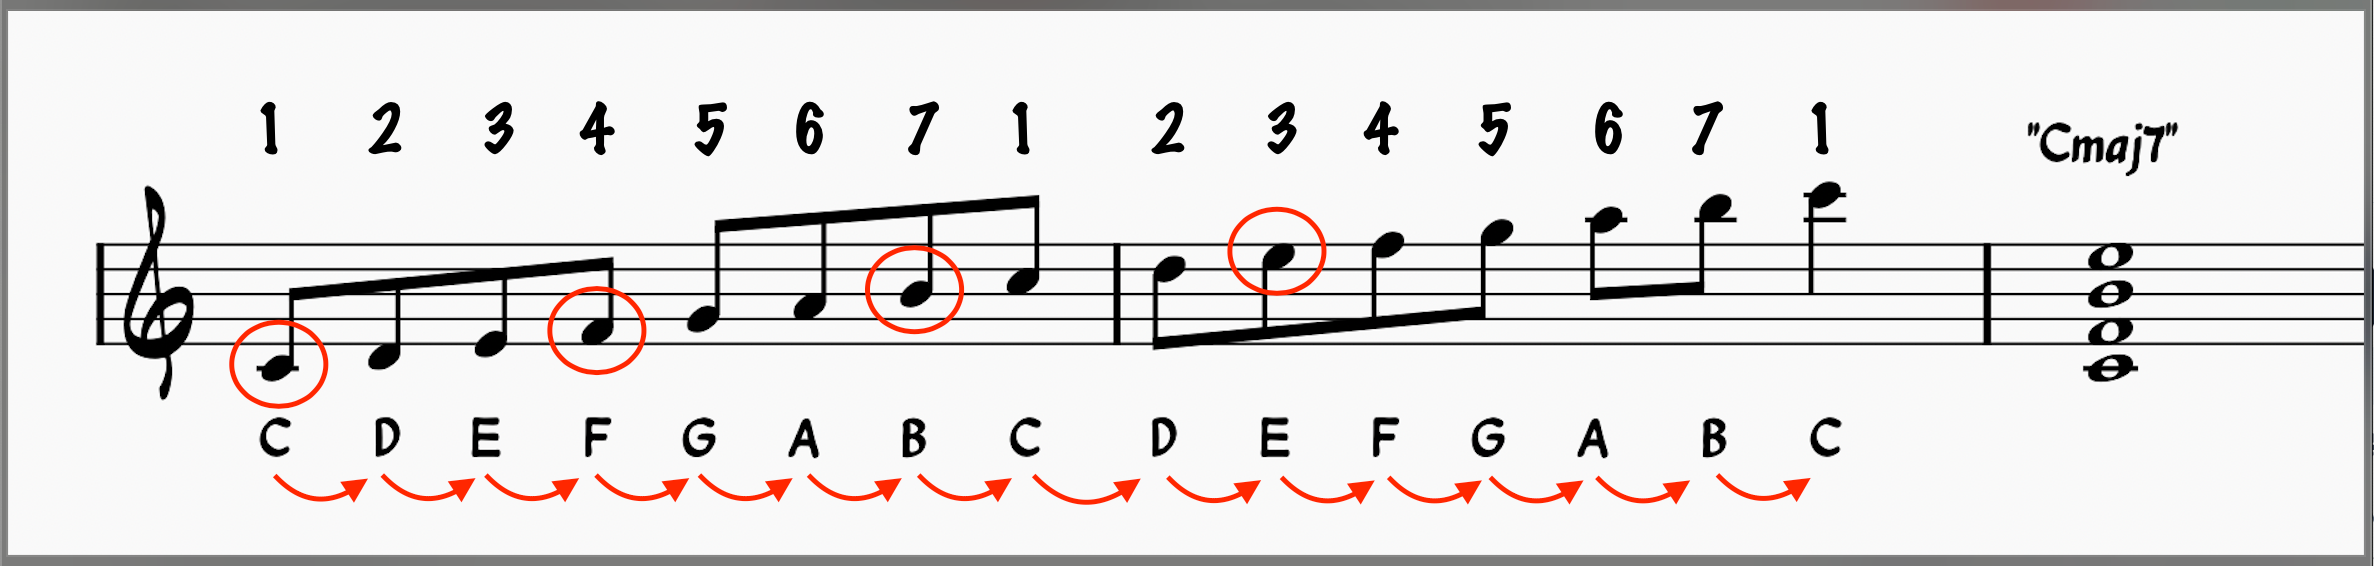 Quartal Harmony: Stacking fourths in the C major scale to built a quartal voicing for Cmaj7